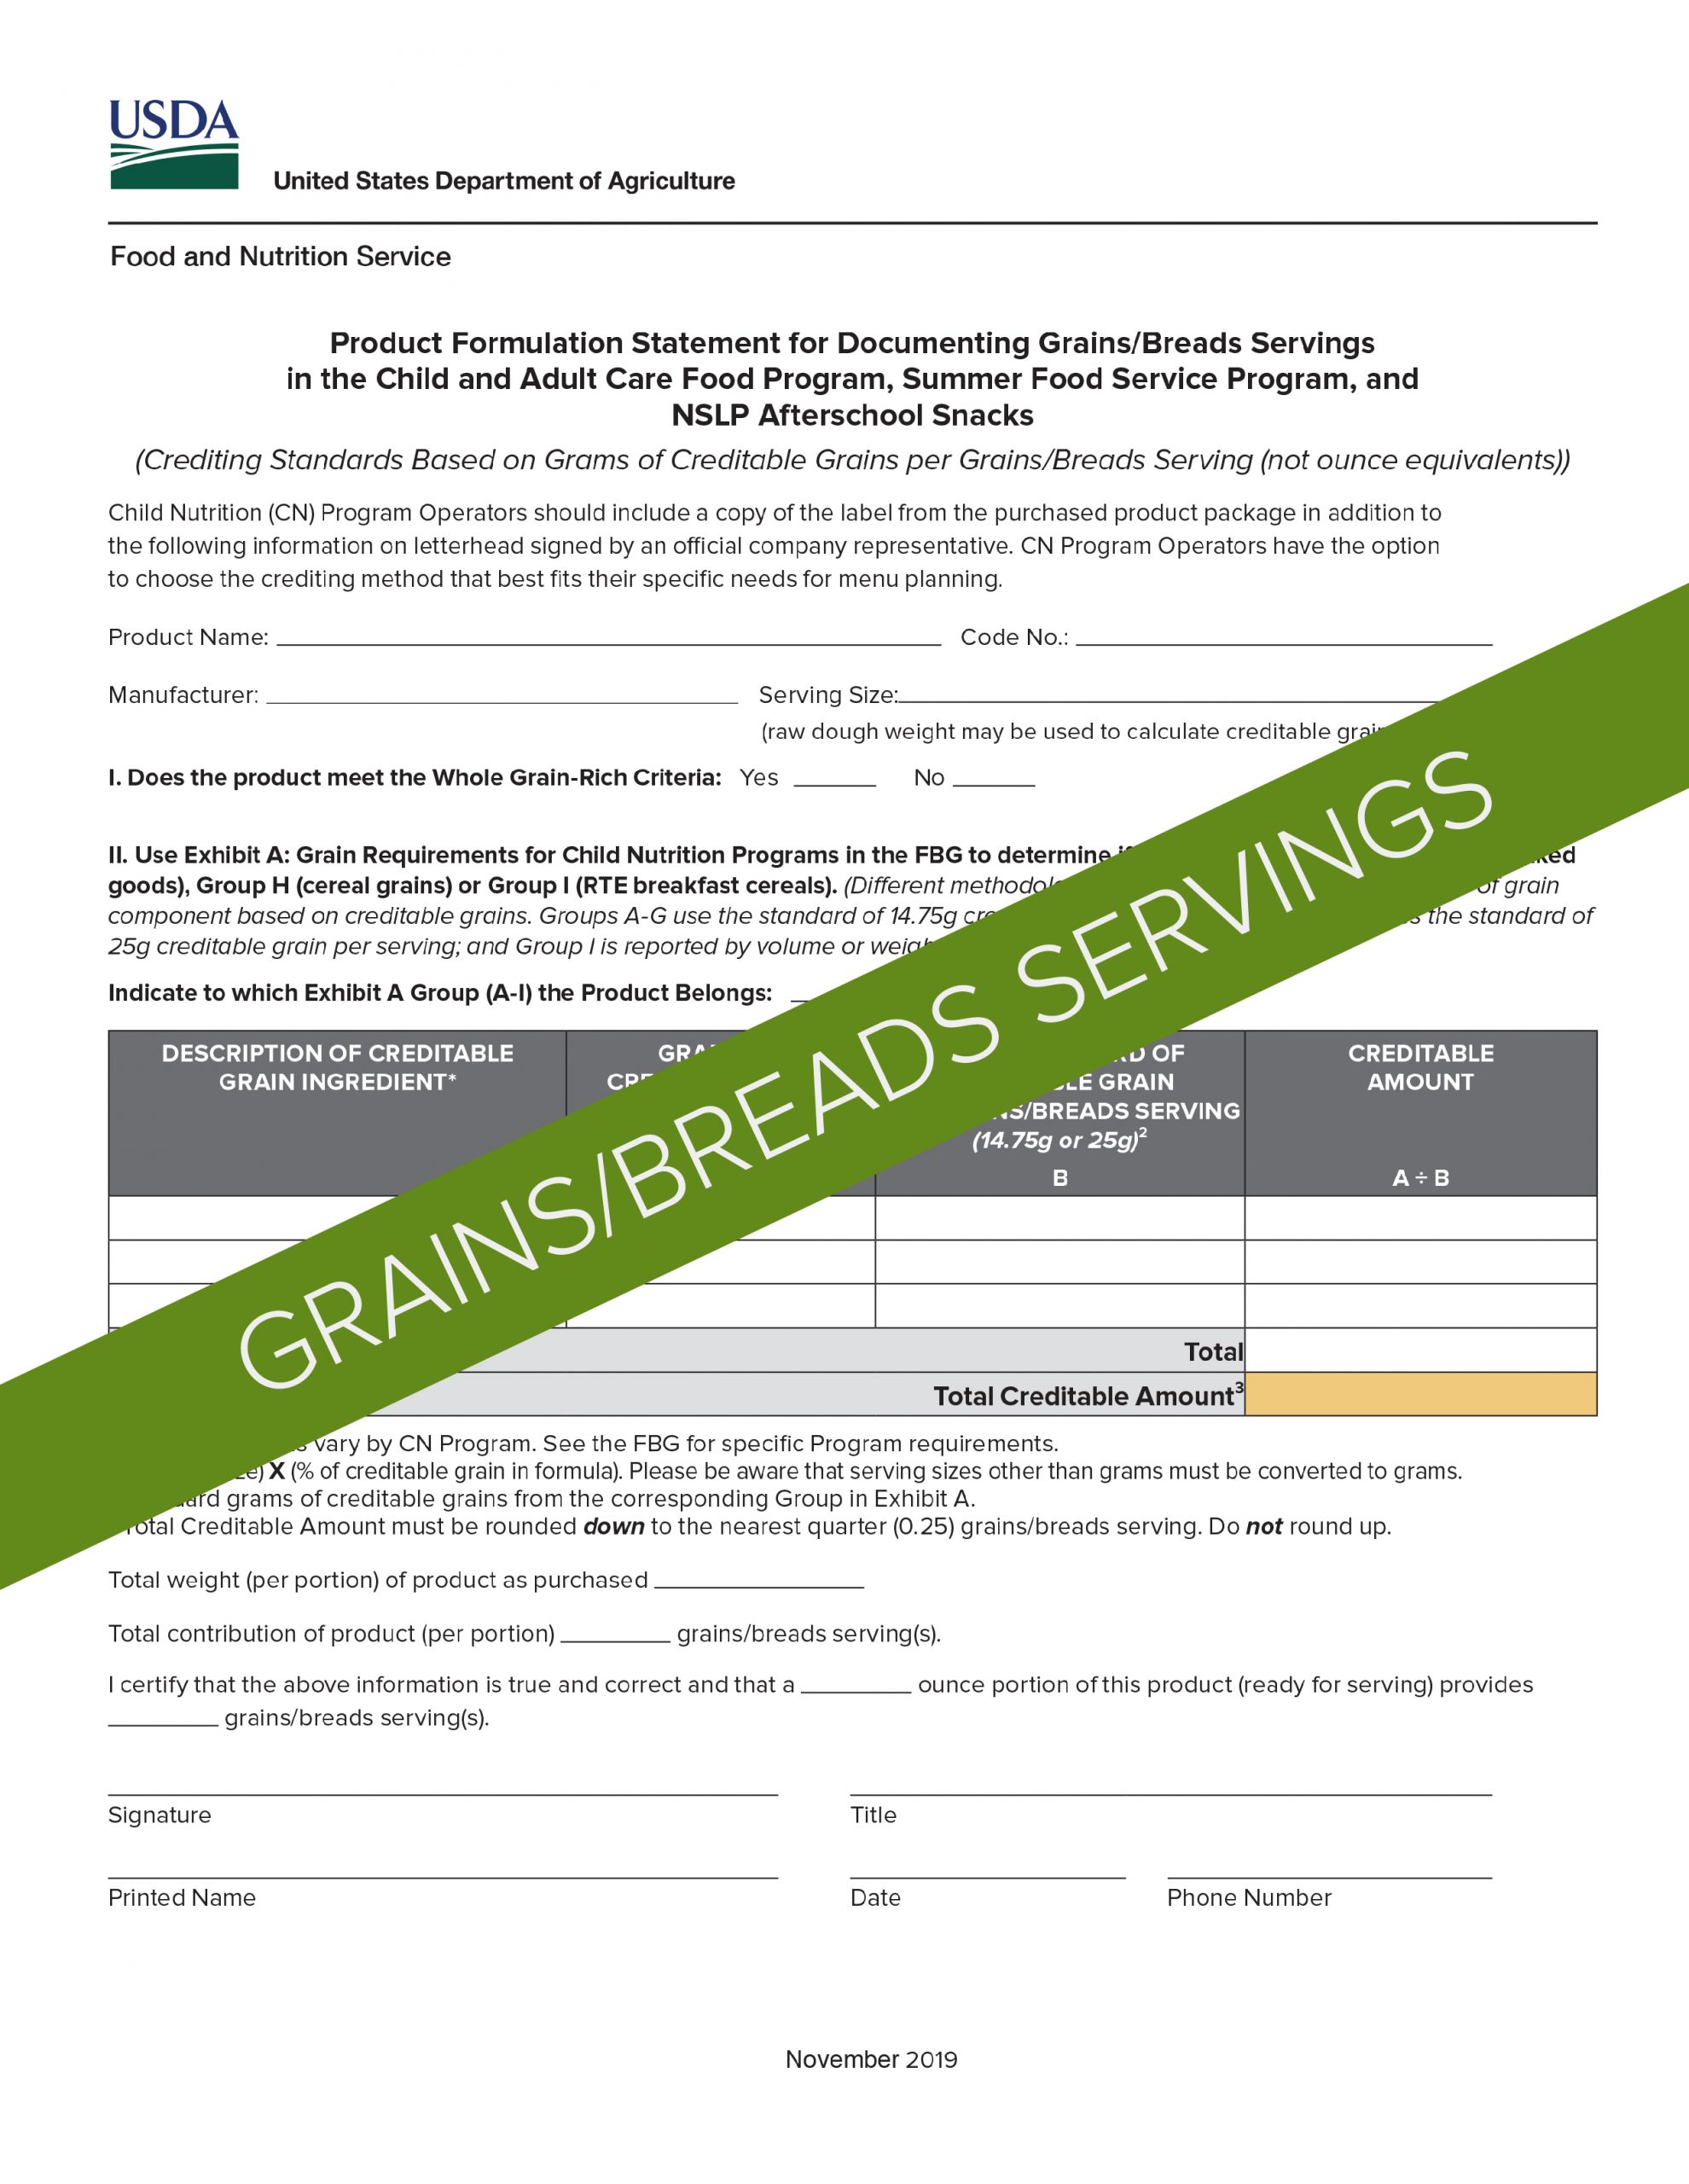 USDA Product Formulation Statement Template for Grains/Breads Servings